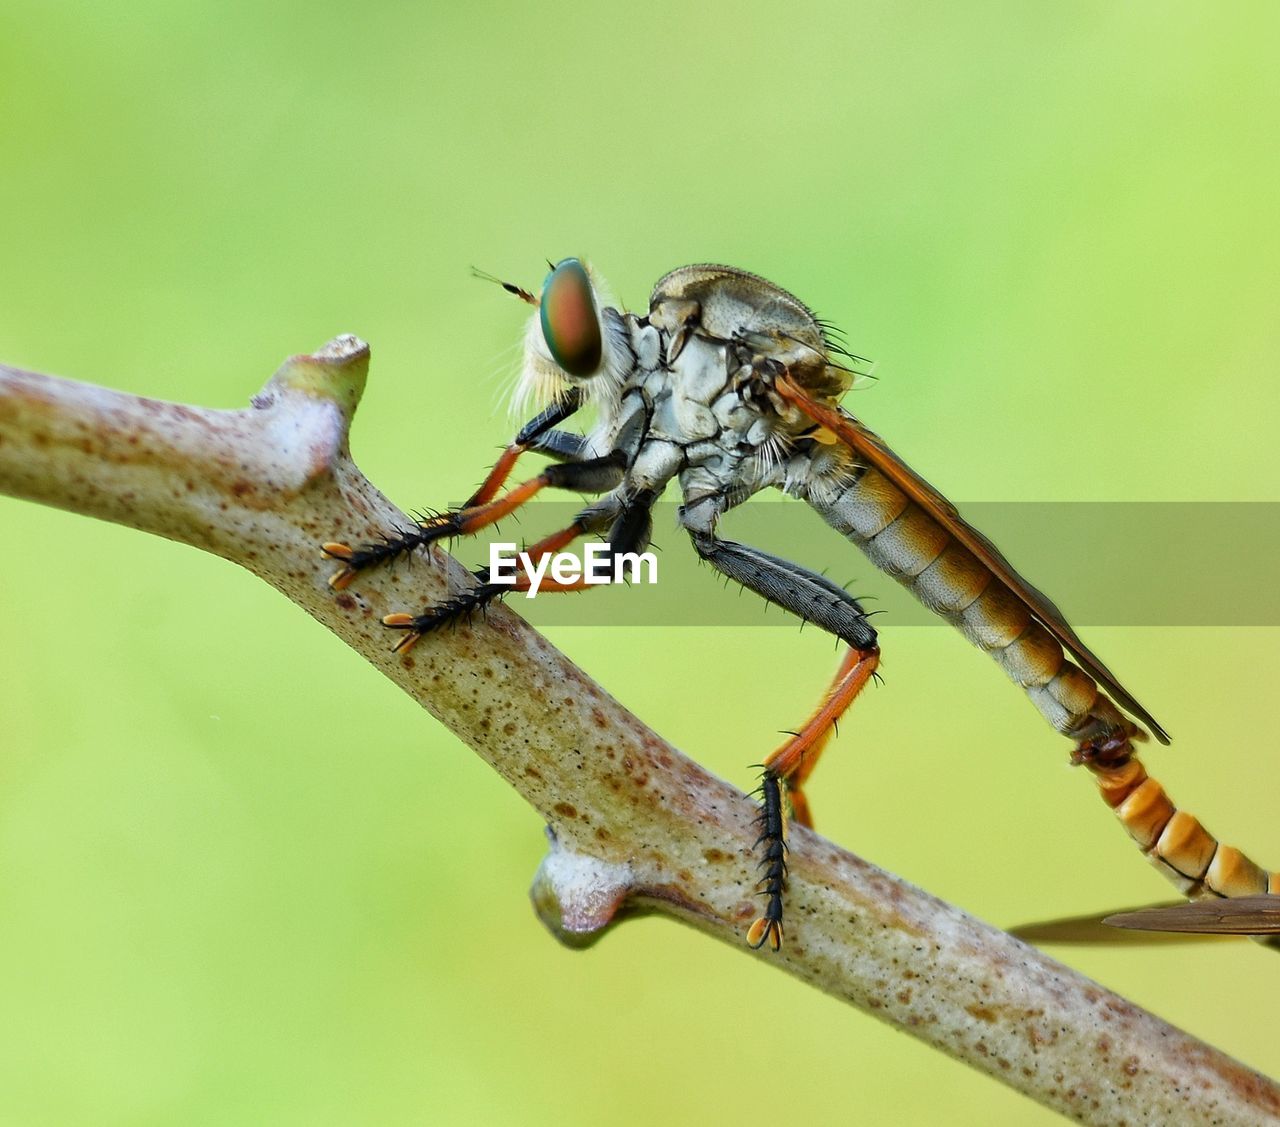 CLOSE-UP OF GRASSHOPPER ON TWIG